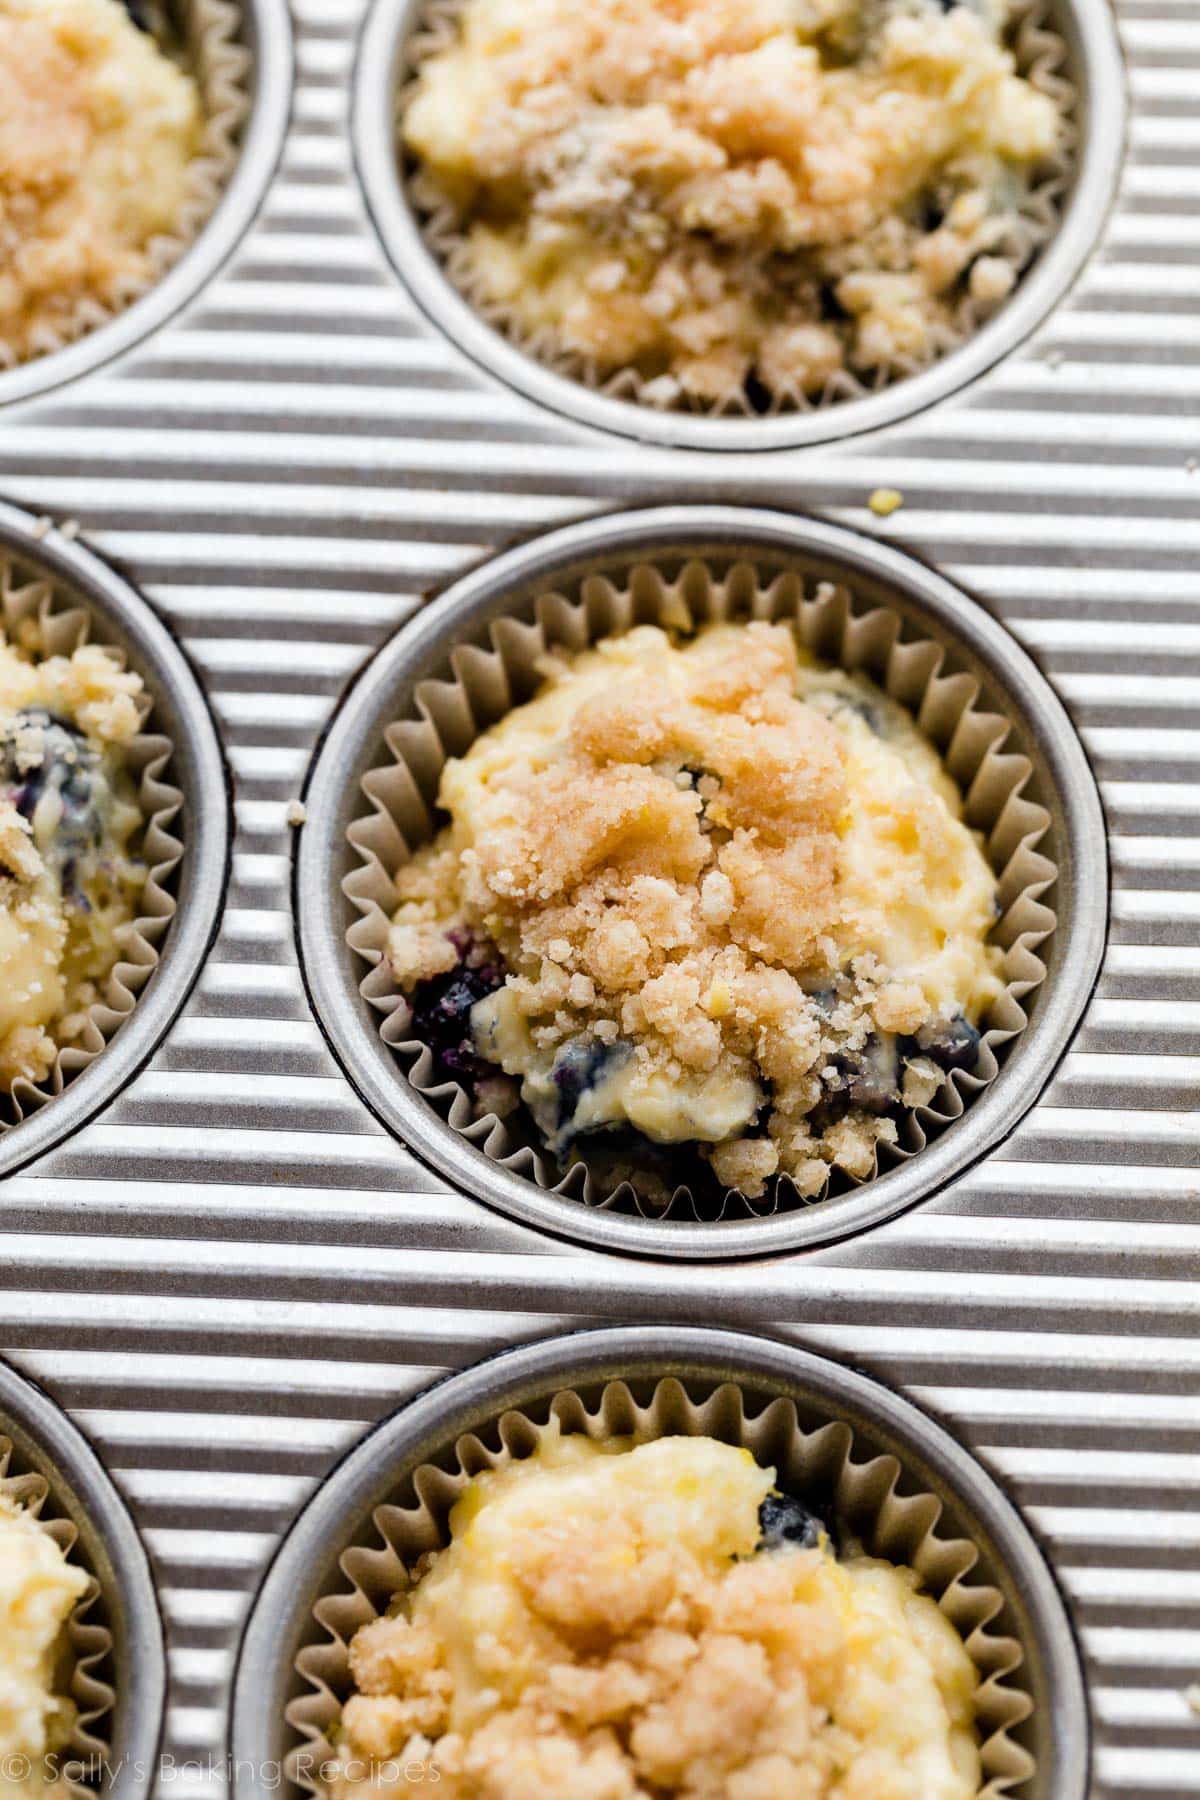 muffin batter with crumb topping on top before baking in muffin pan.